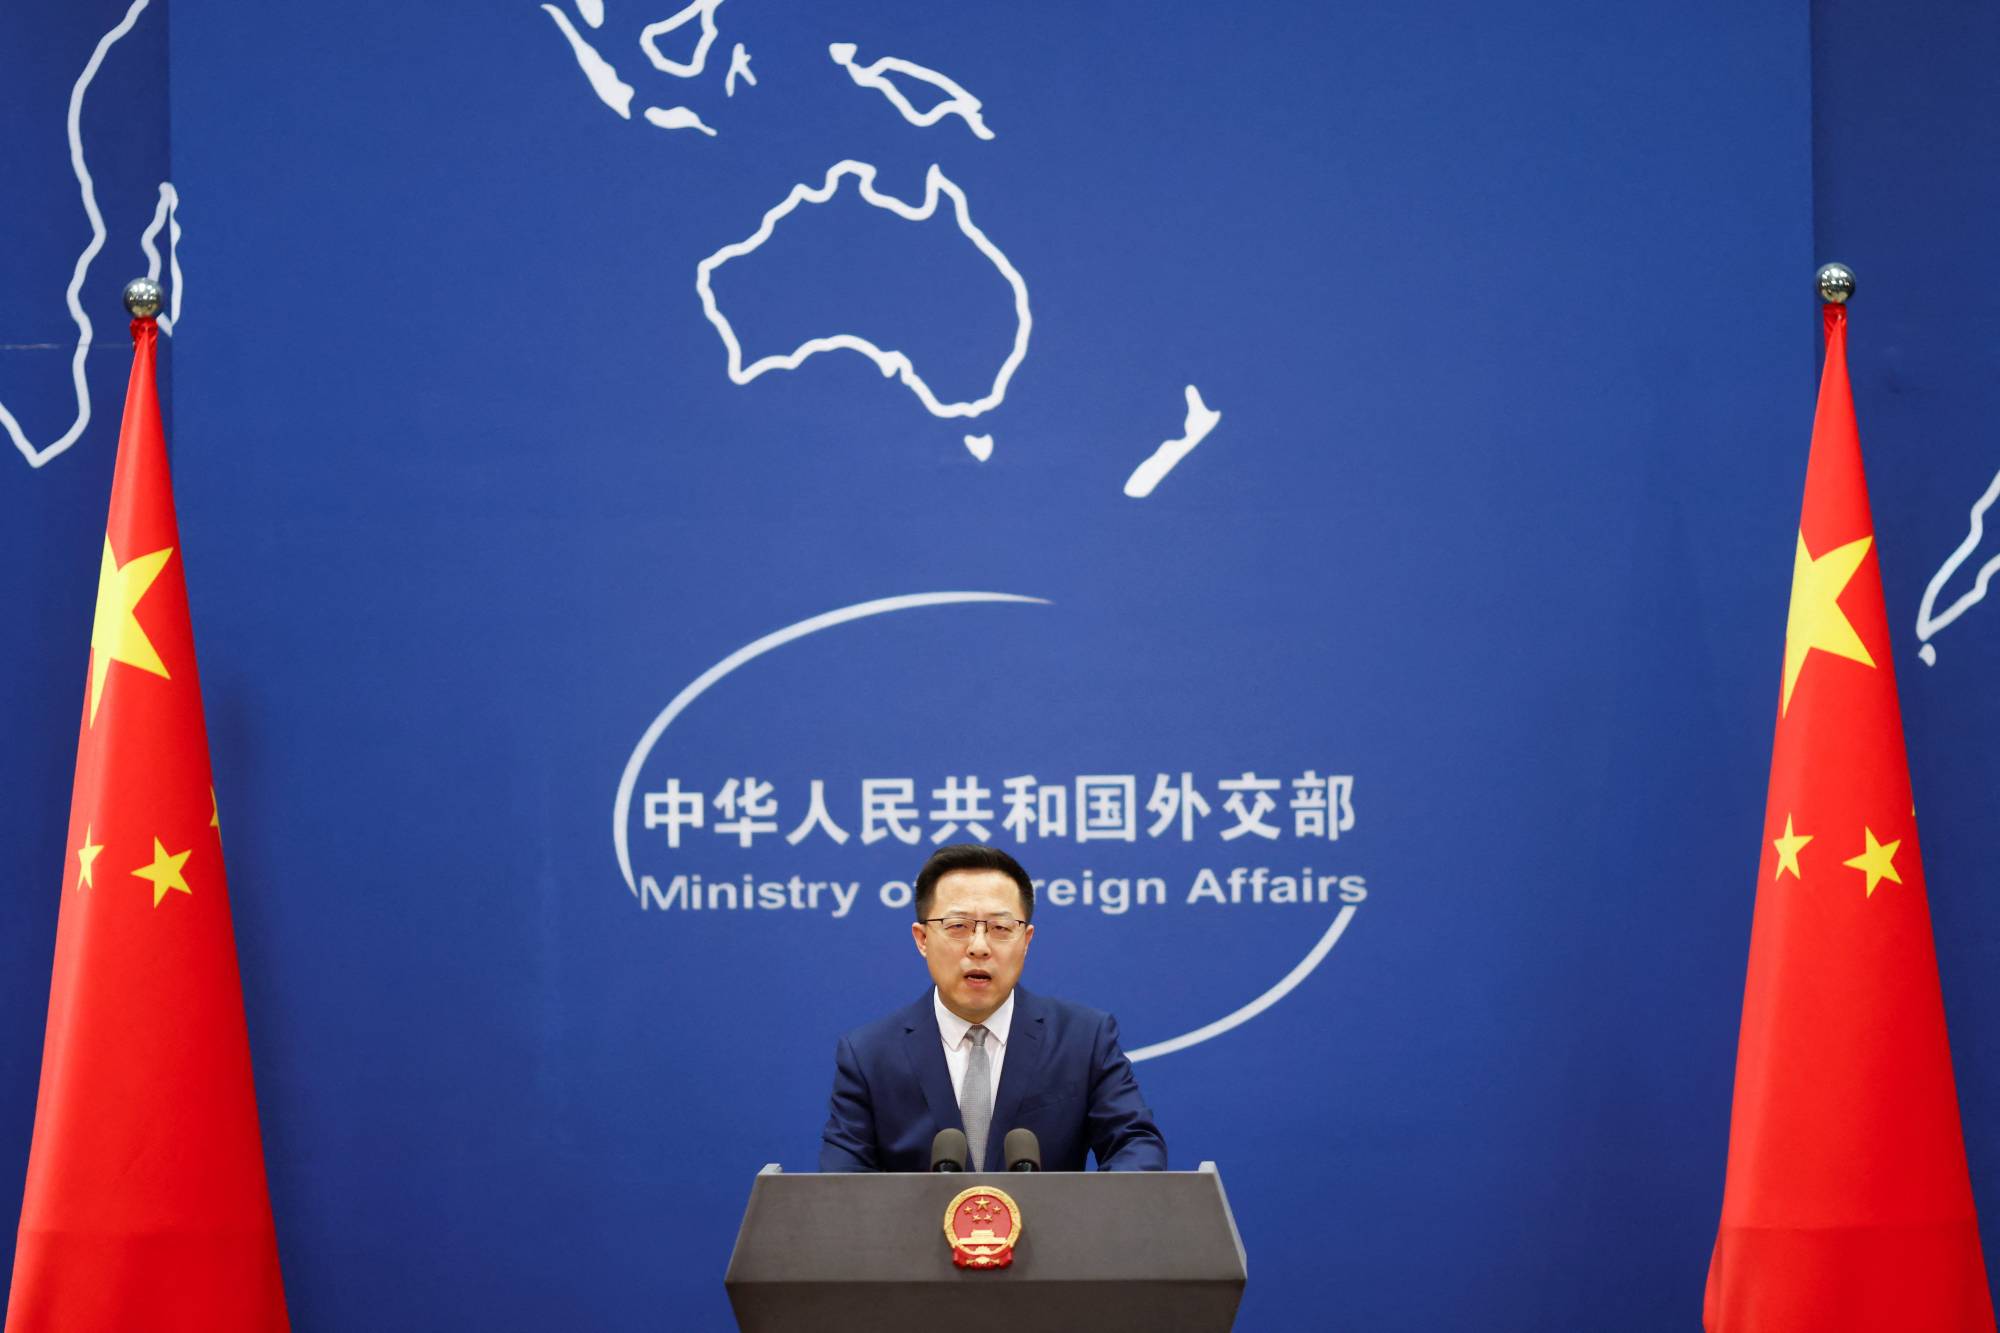 China's foreign ministry spokesperson Zhao Lijian speaks during a news conference in Beijing, on March 18. | REUTERS